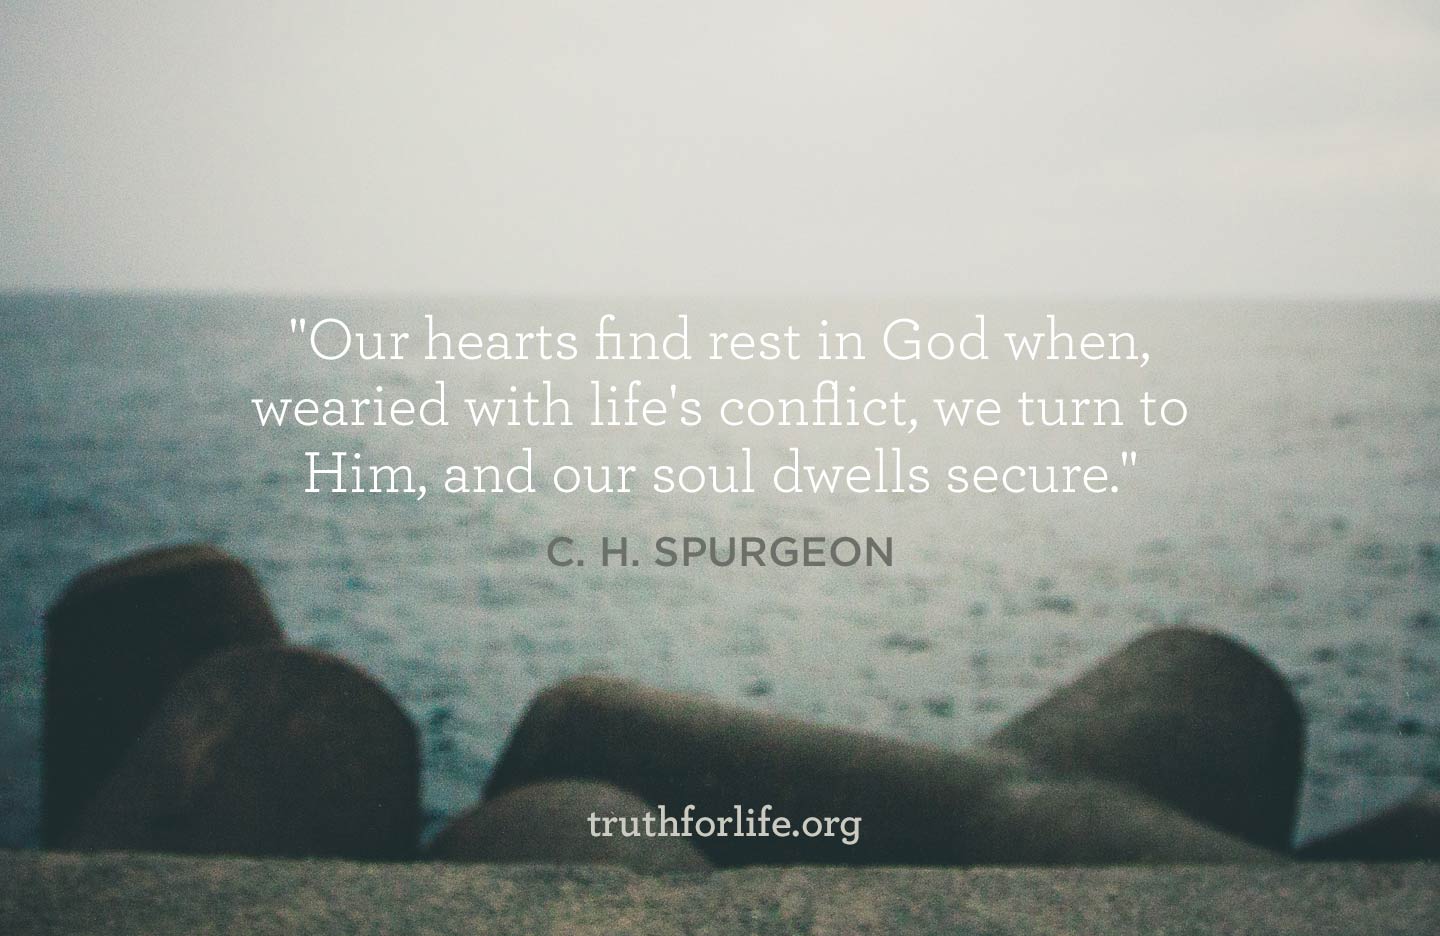 thumbnail image for Our Soul Dwells Secure:Wallpaper